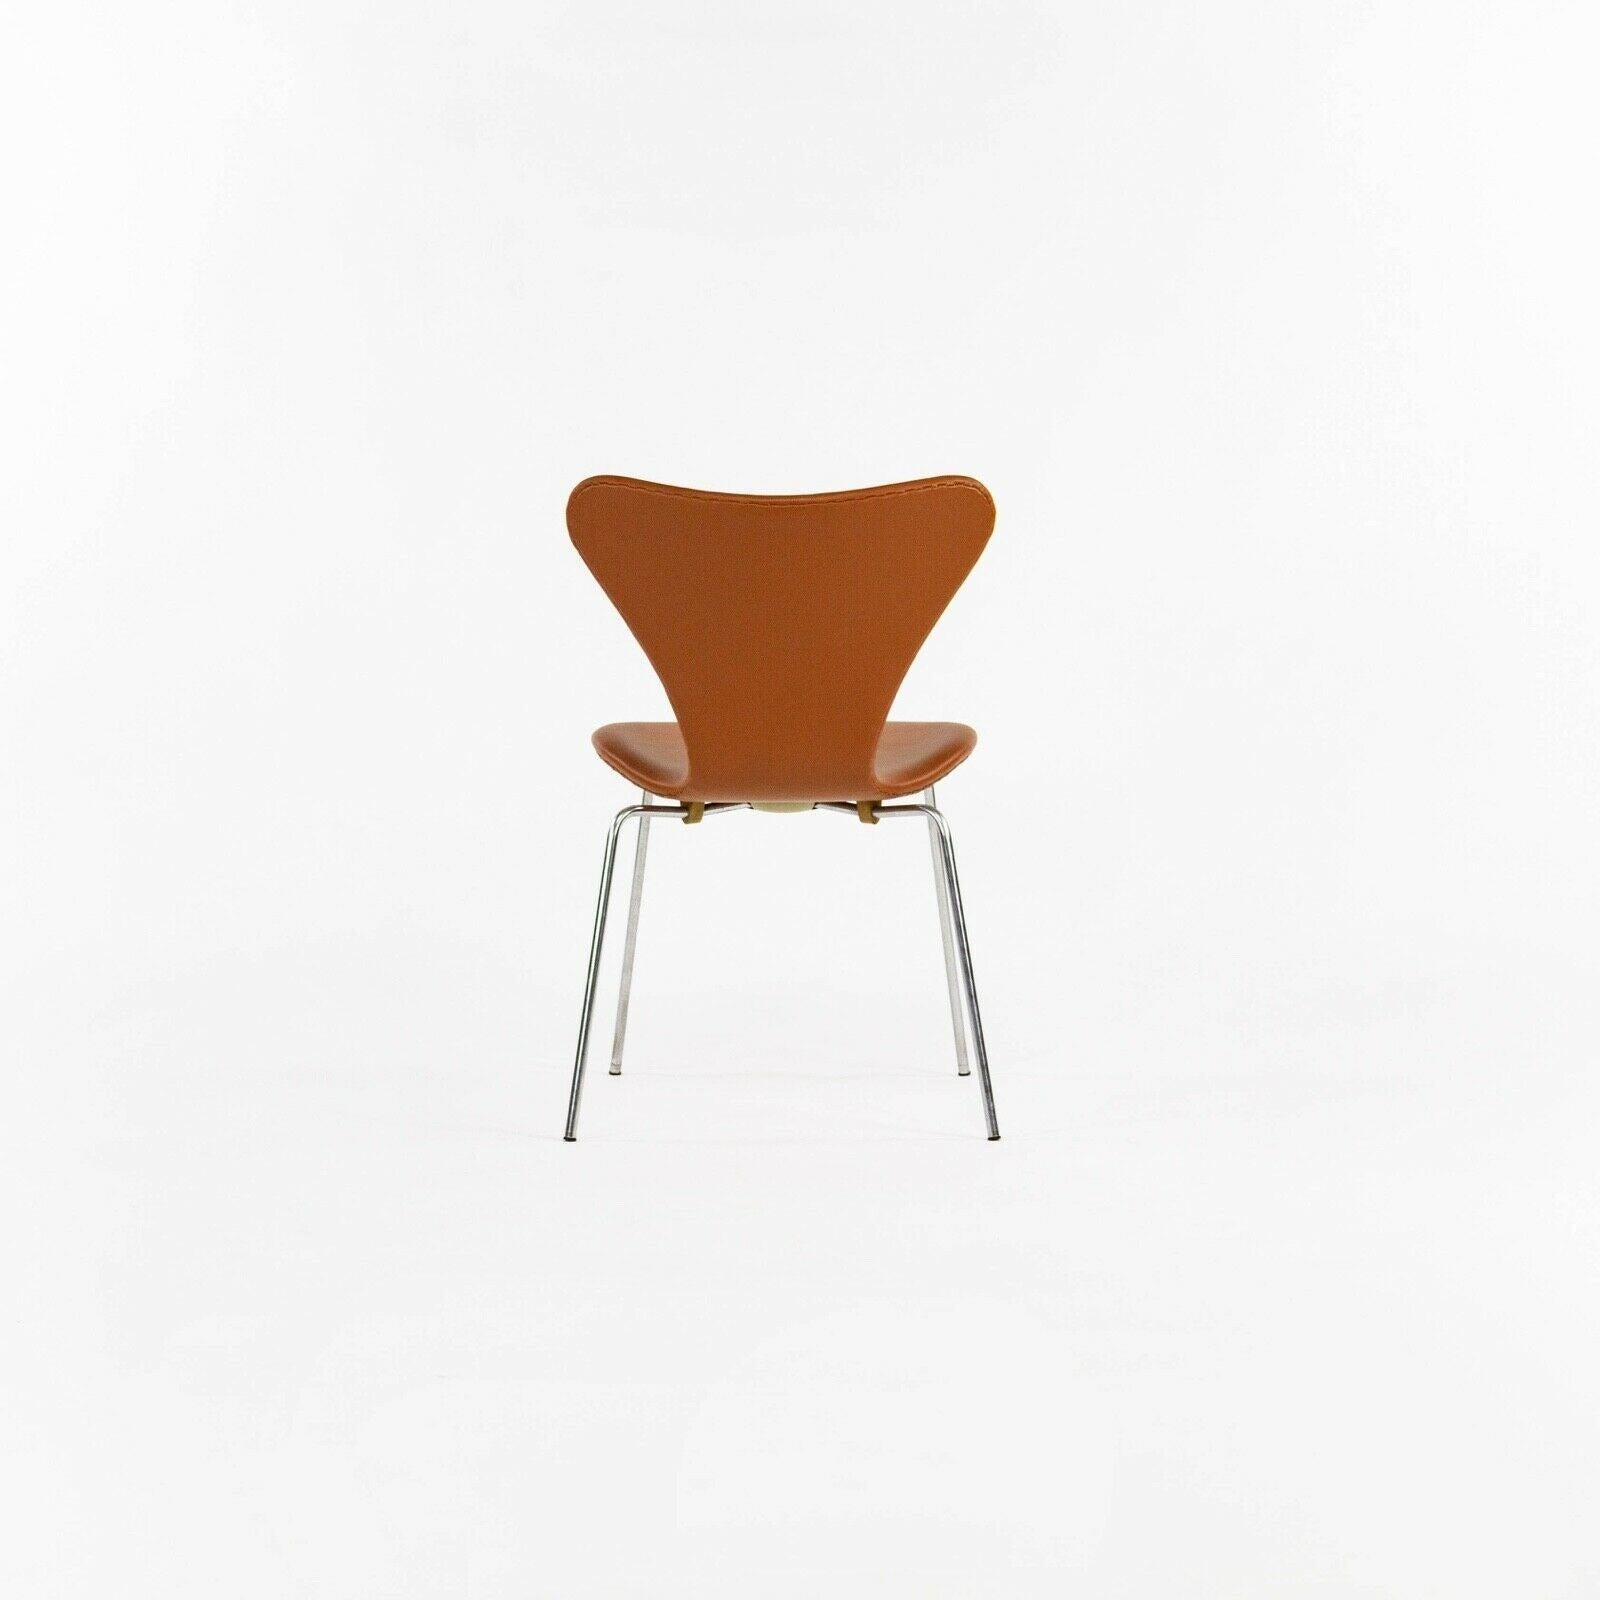 Metal Set of 4x 1969 Arne Jacobsen Fritz Hansen Series 7 Handstiched Leather Chairs For Sale